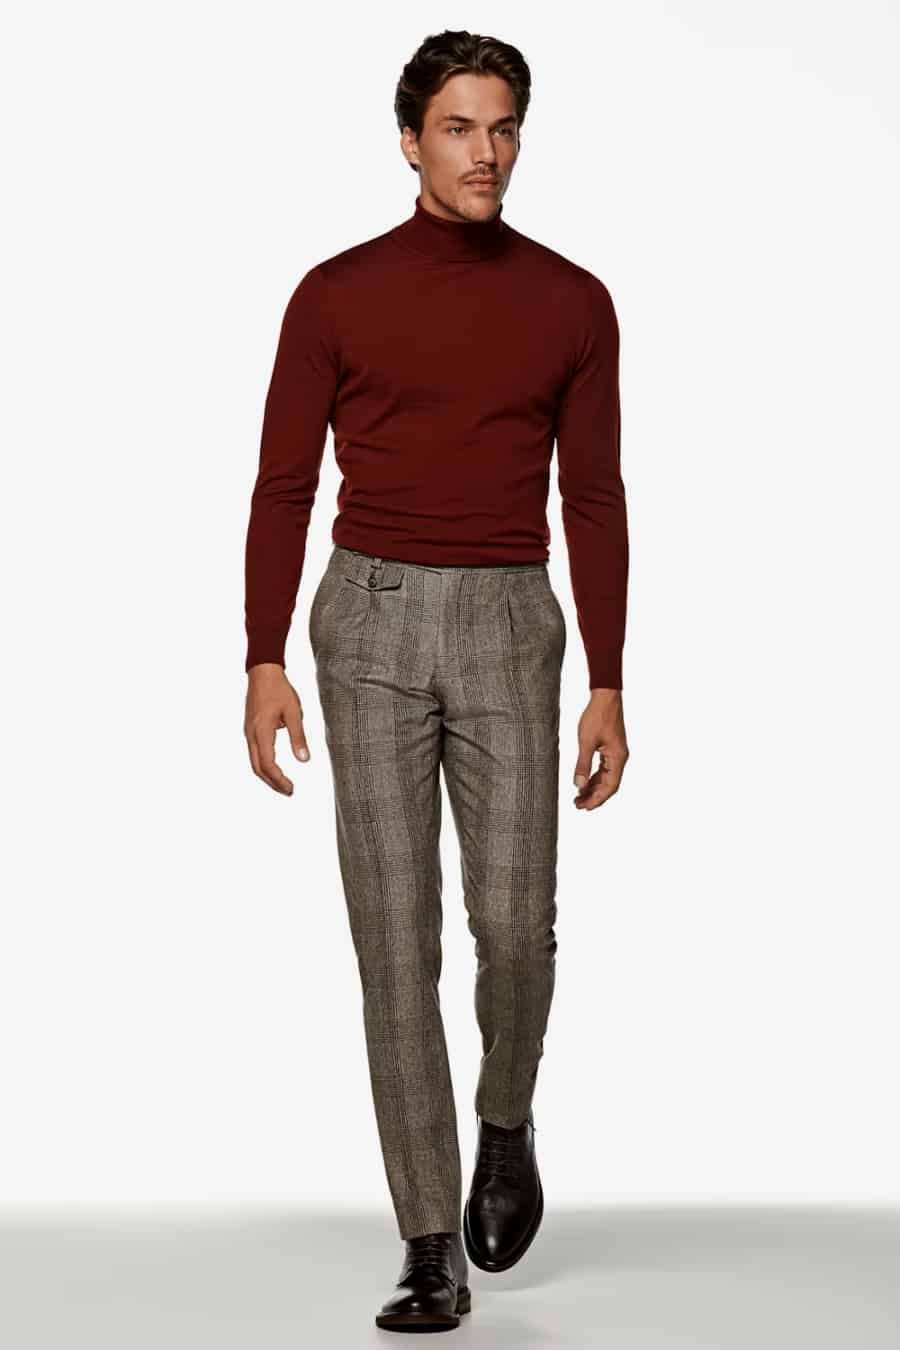 Men's smart plaid pants, burgundy turtleneck and brown leather boots outfit